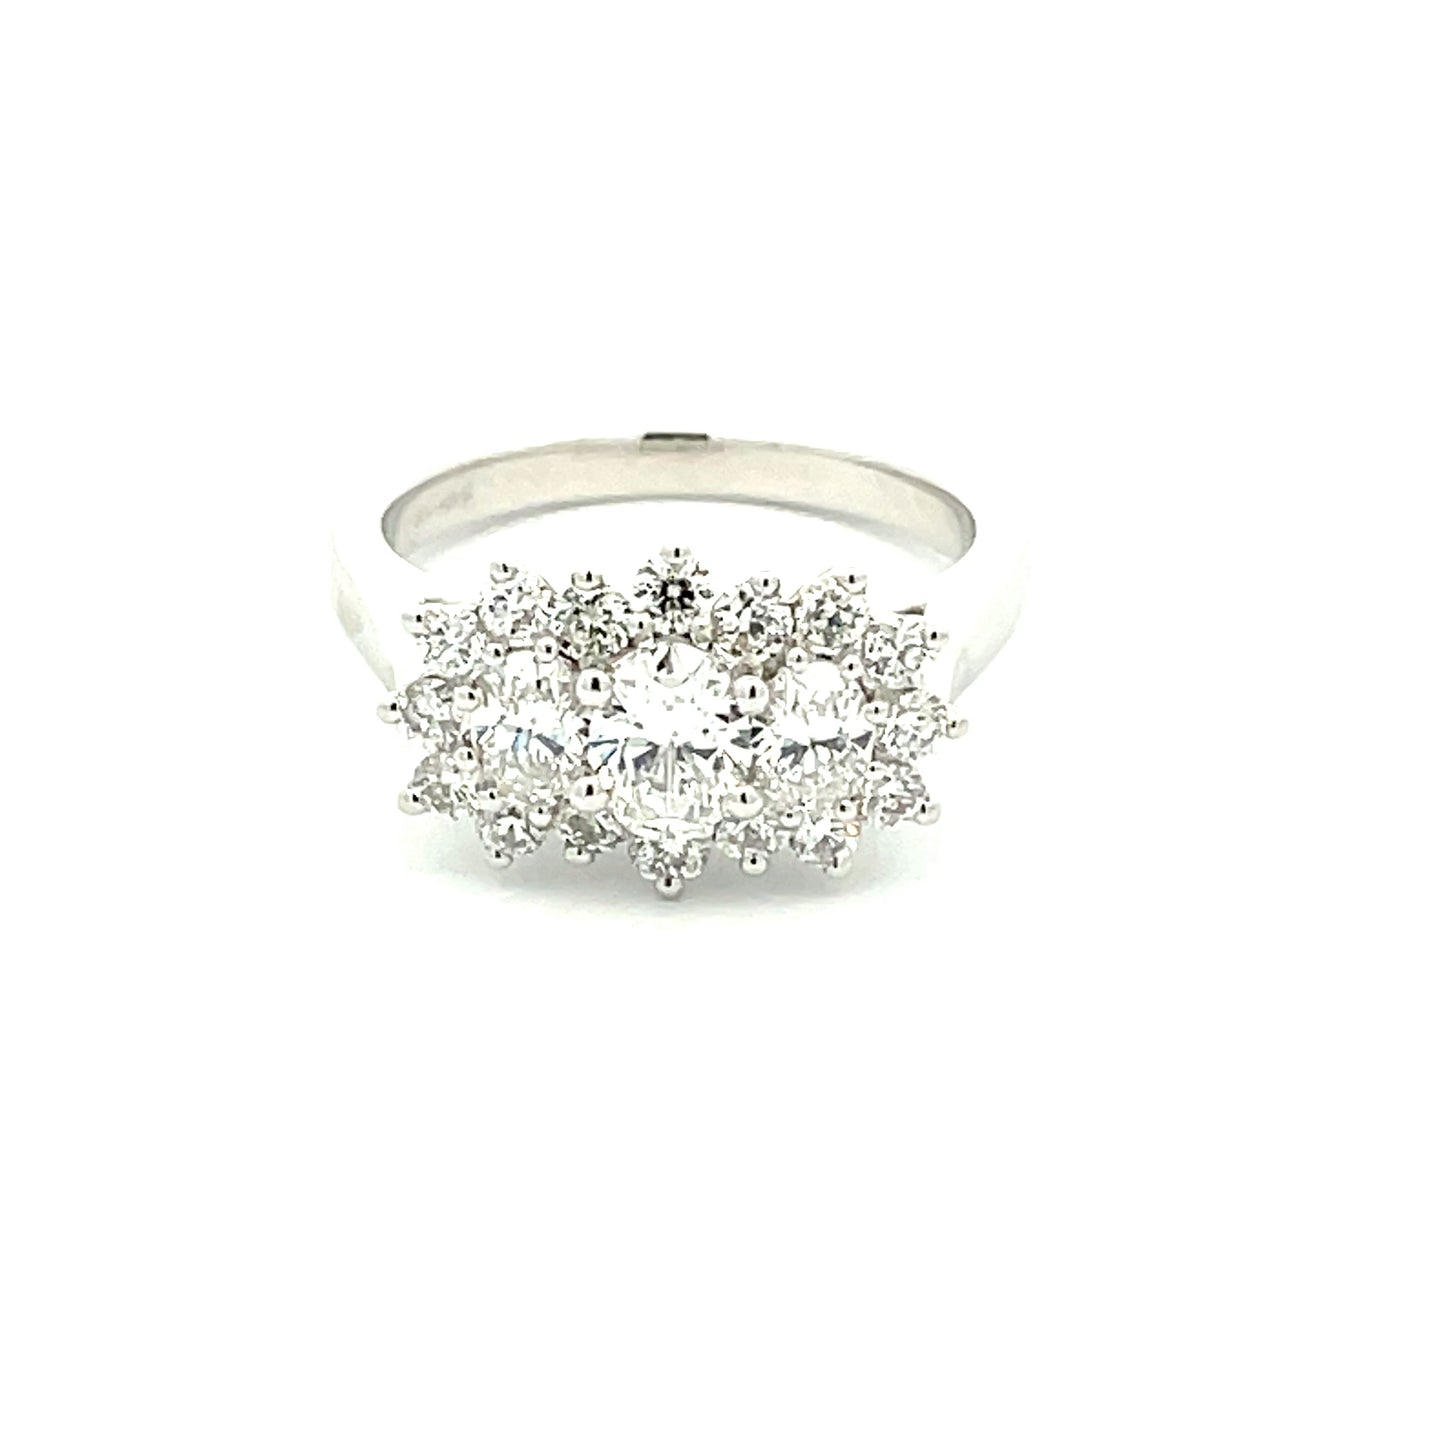 3 Oval Shaped Diamond Cluster Style Ring - 1.35cts  Gardiner Brothers   